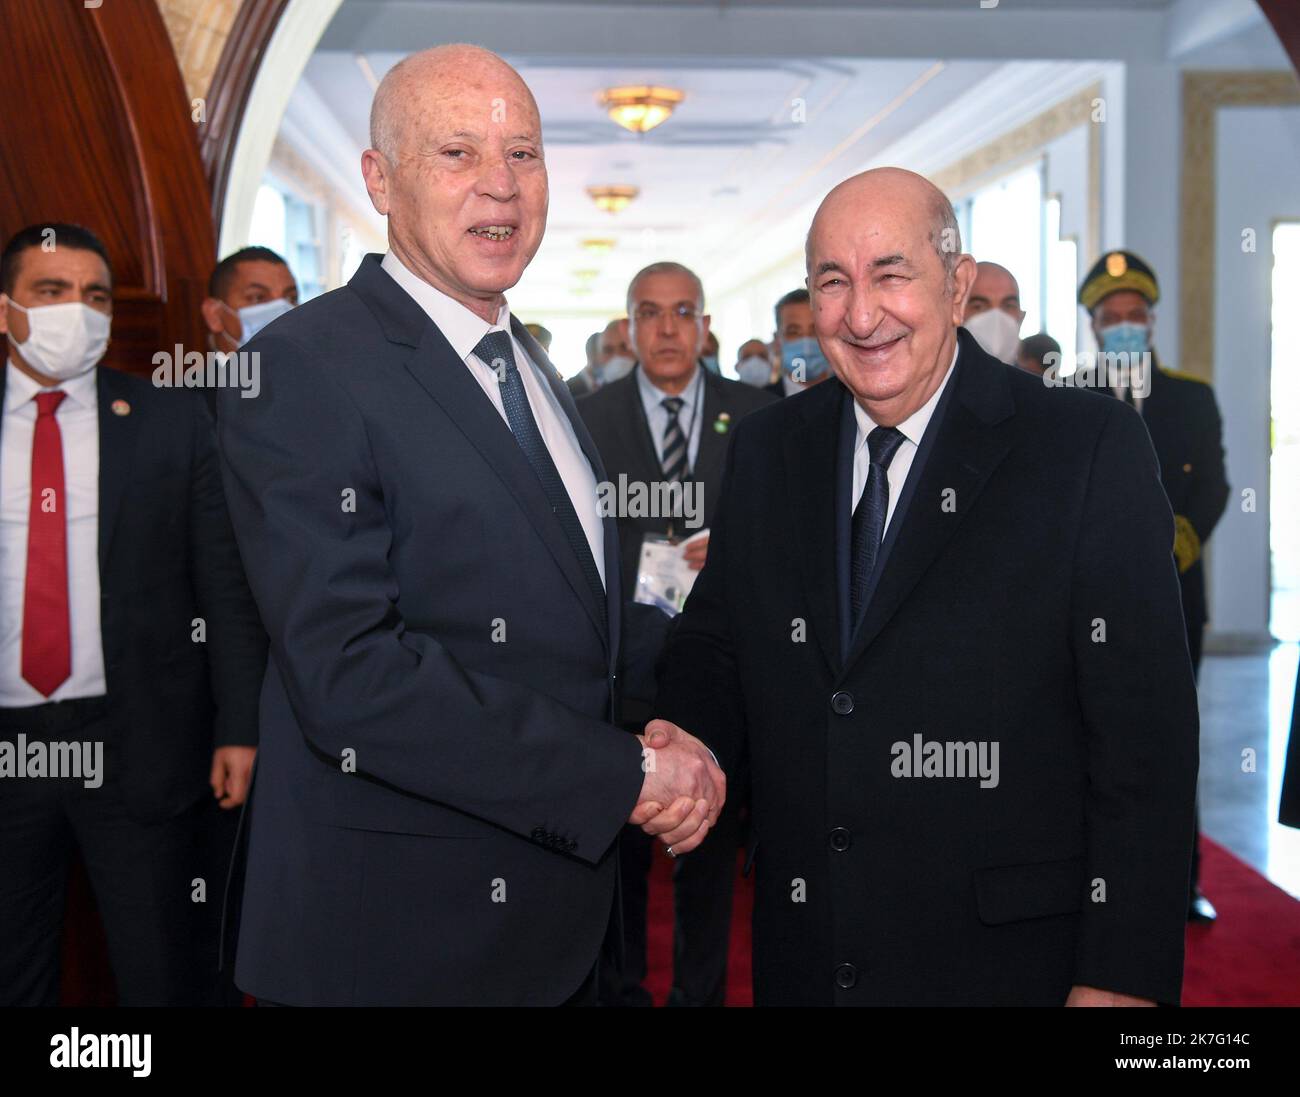 ©Yassine Mahjoub/MAXPPP - Algerian President Abdelmadjid Tebboune begins a two-day state visit to Tunisia on Wednesday December 15 and 16 at the invitation of his Tunisian counterpart, KavØs SavØed, who received him at Tunis-Carthage airport and the palace of Carthage. The official visit of the Algerian President aims to "strengthen the bonds of brotherhood and the relations of cooperation and partnership as well as to consolidate consultation and coordination between the leaders of the two countries on topical regional and international issues. Tunisian presidency.  Stock Photo